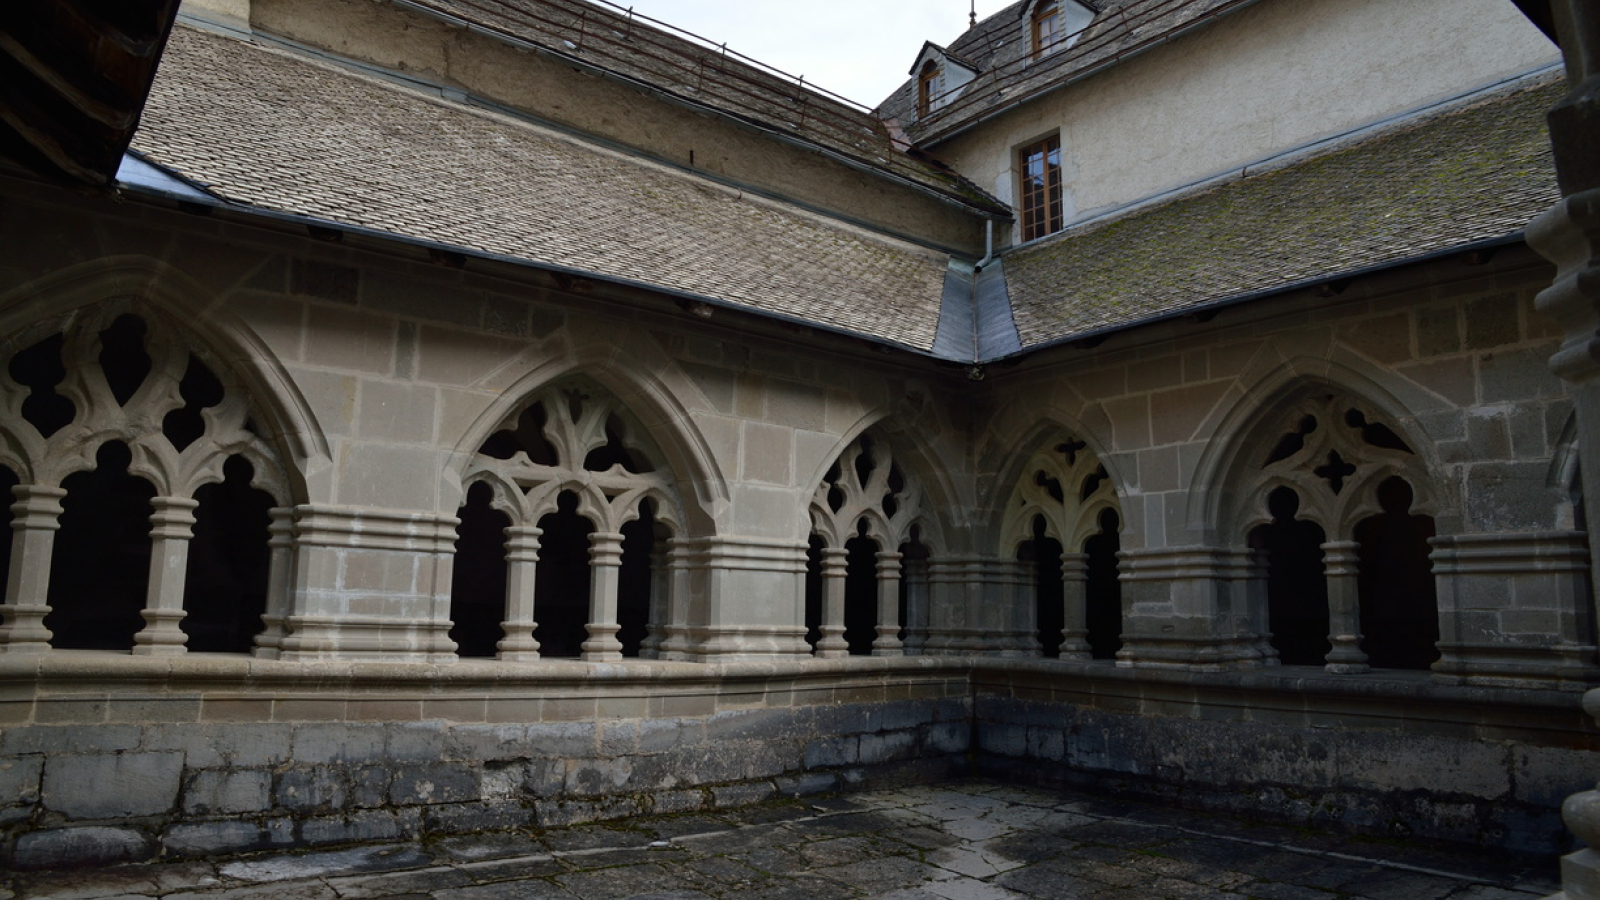 The cloister in Flamboyant Gothic Style